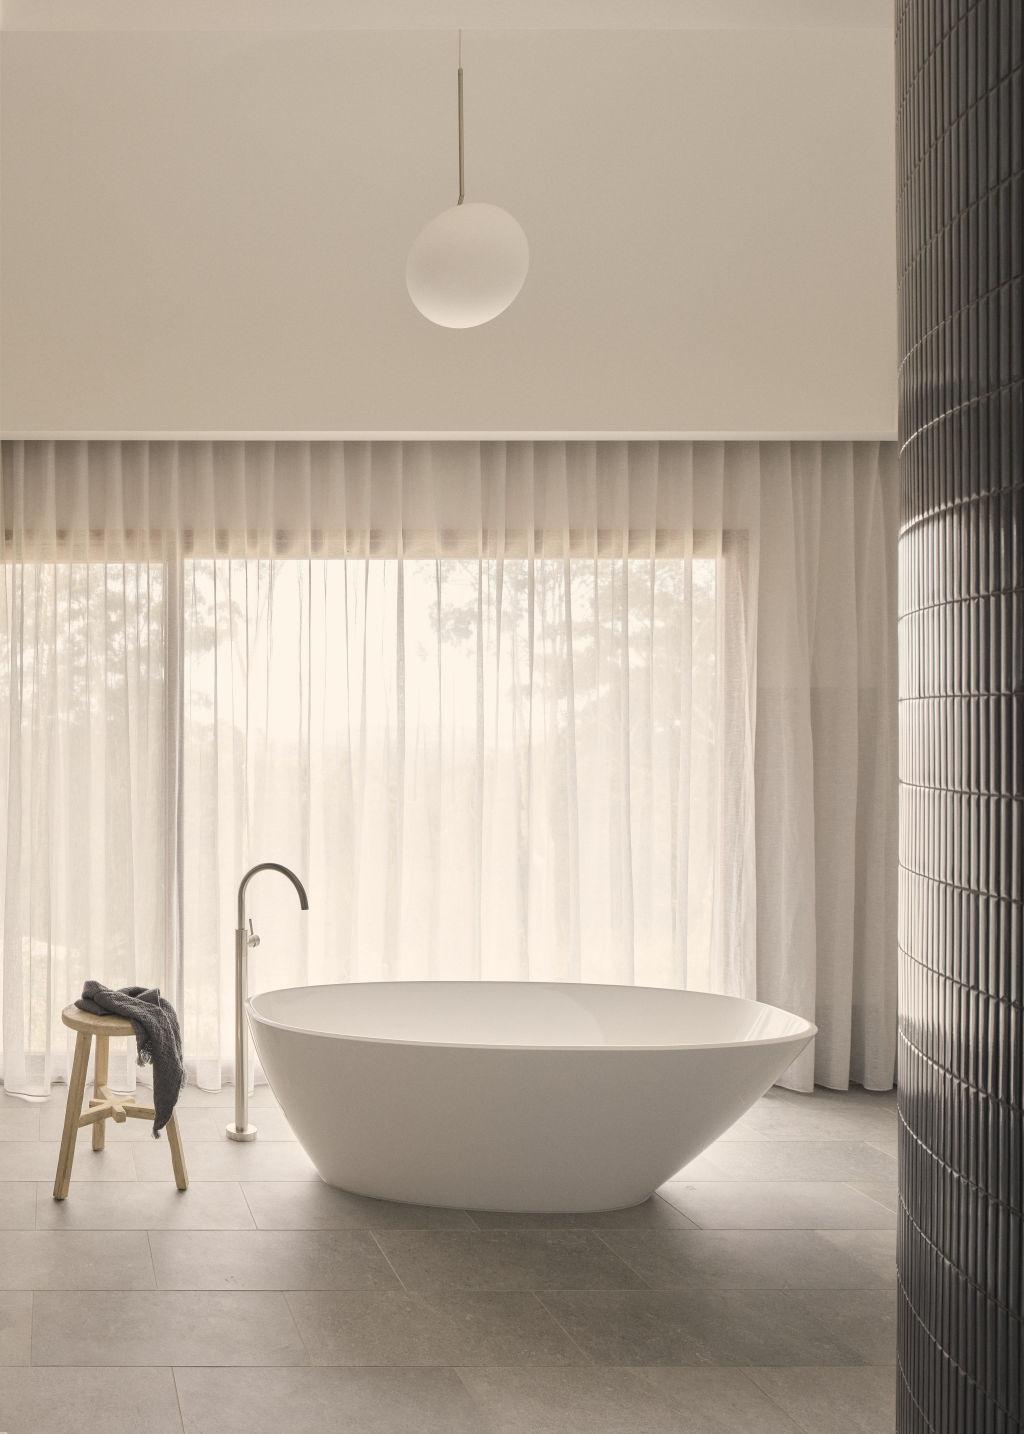 Could there be a more relaxing space for a soak? Photo: David Chatfield